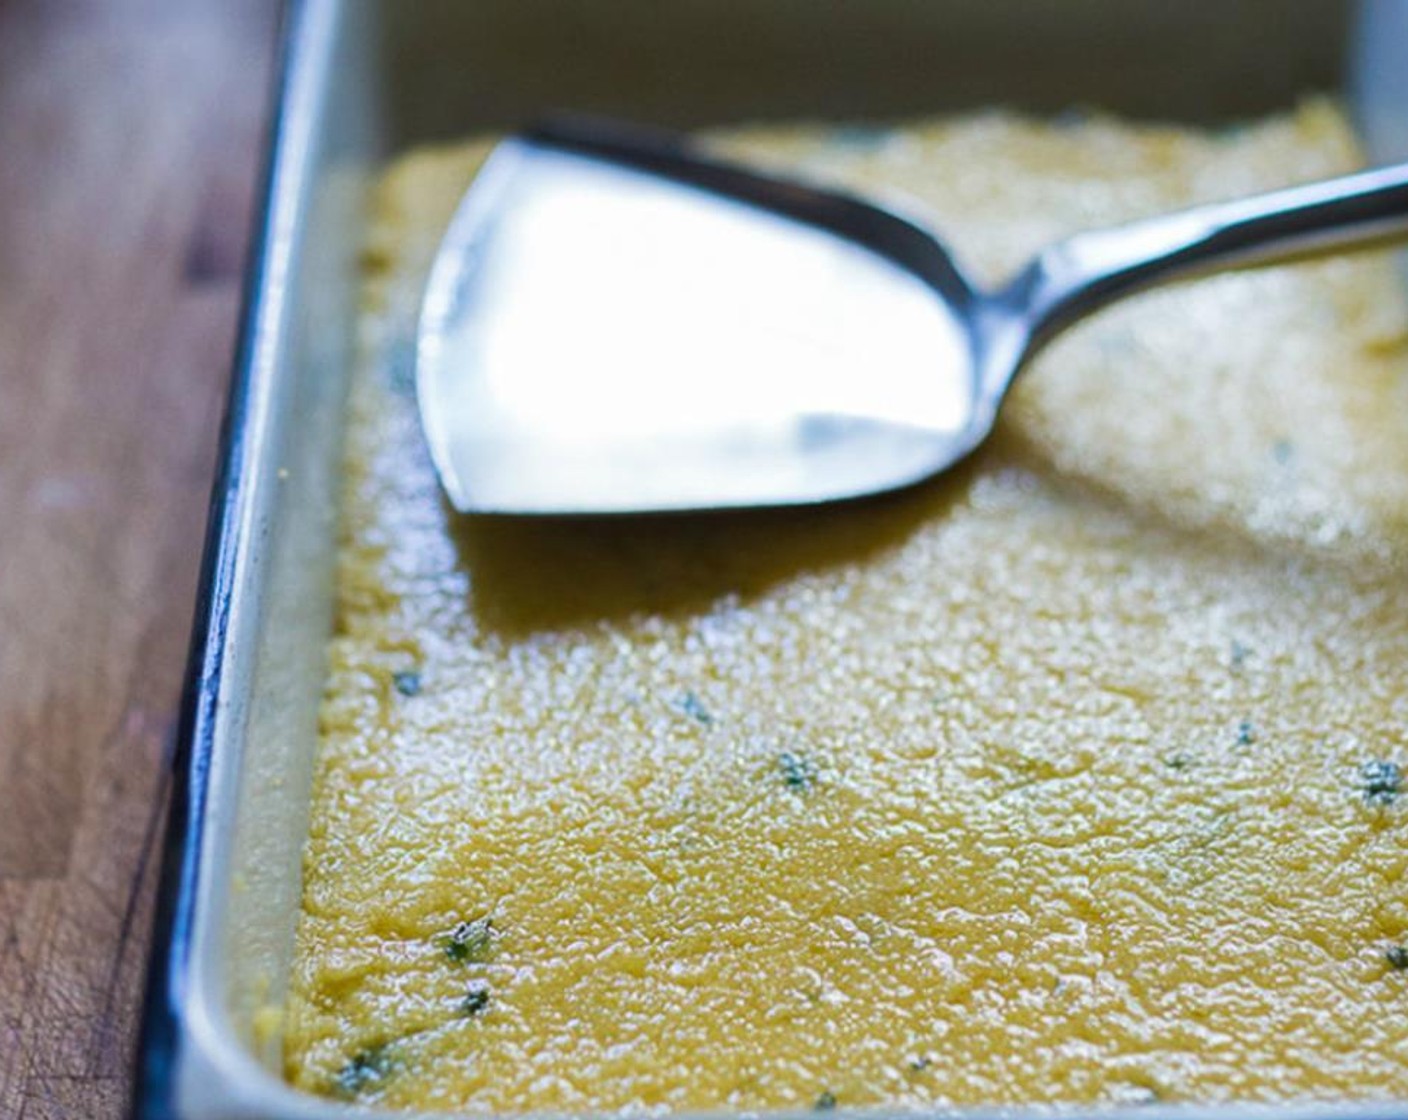 step 9 Spread on a greased baking dish, smoothing out with a flat bottom metal spatula, coated in olive oil, to 3/4-inch thickness. Refrigerate, until firm and chilled over night or for at least 2 hours.